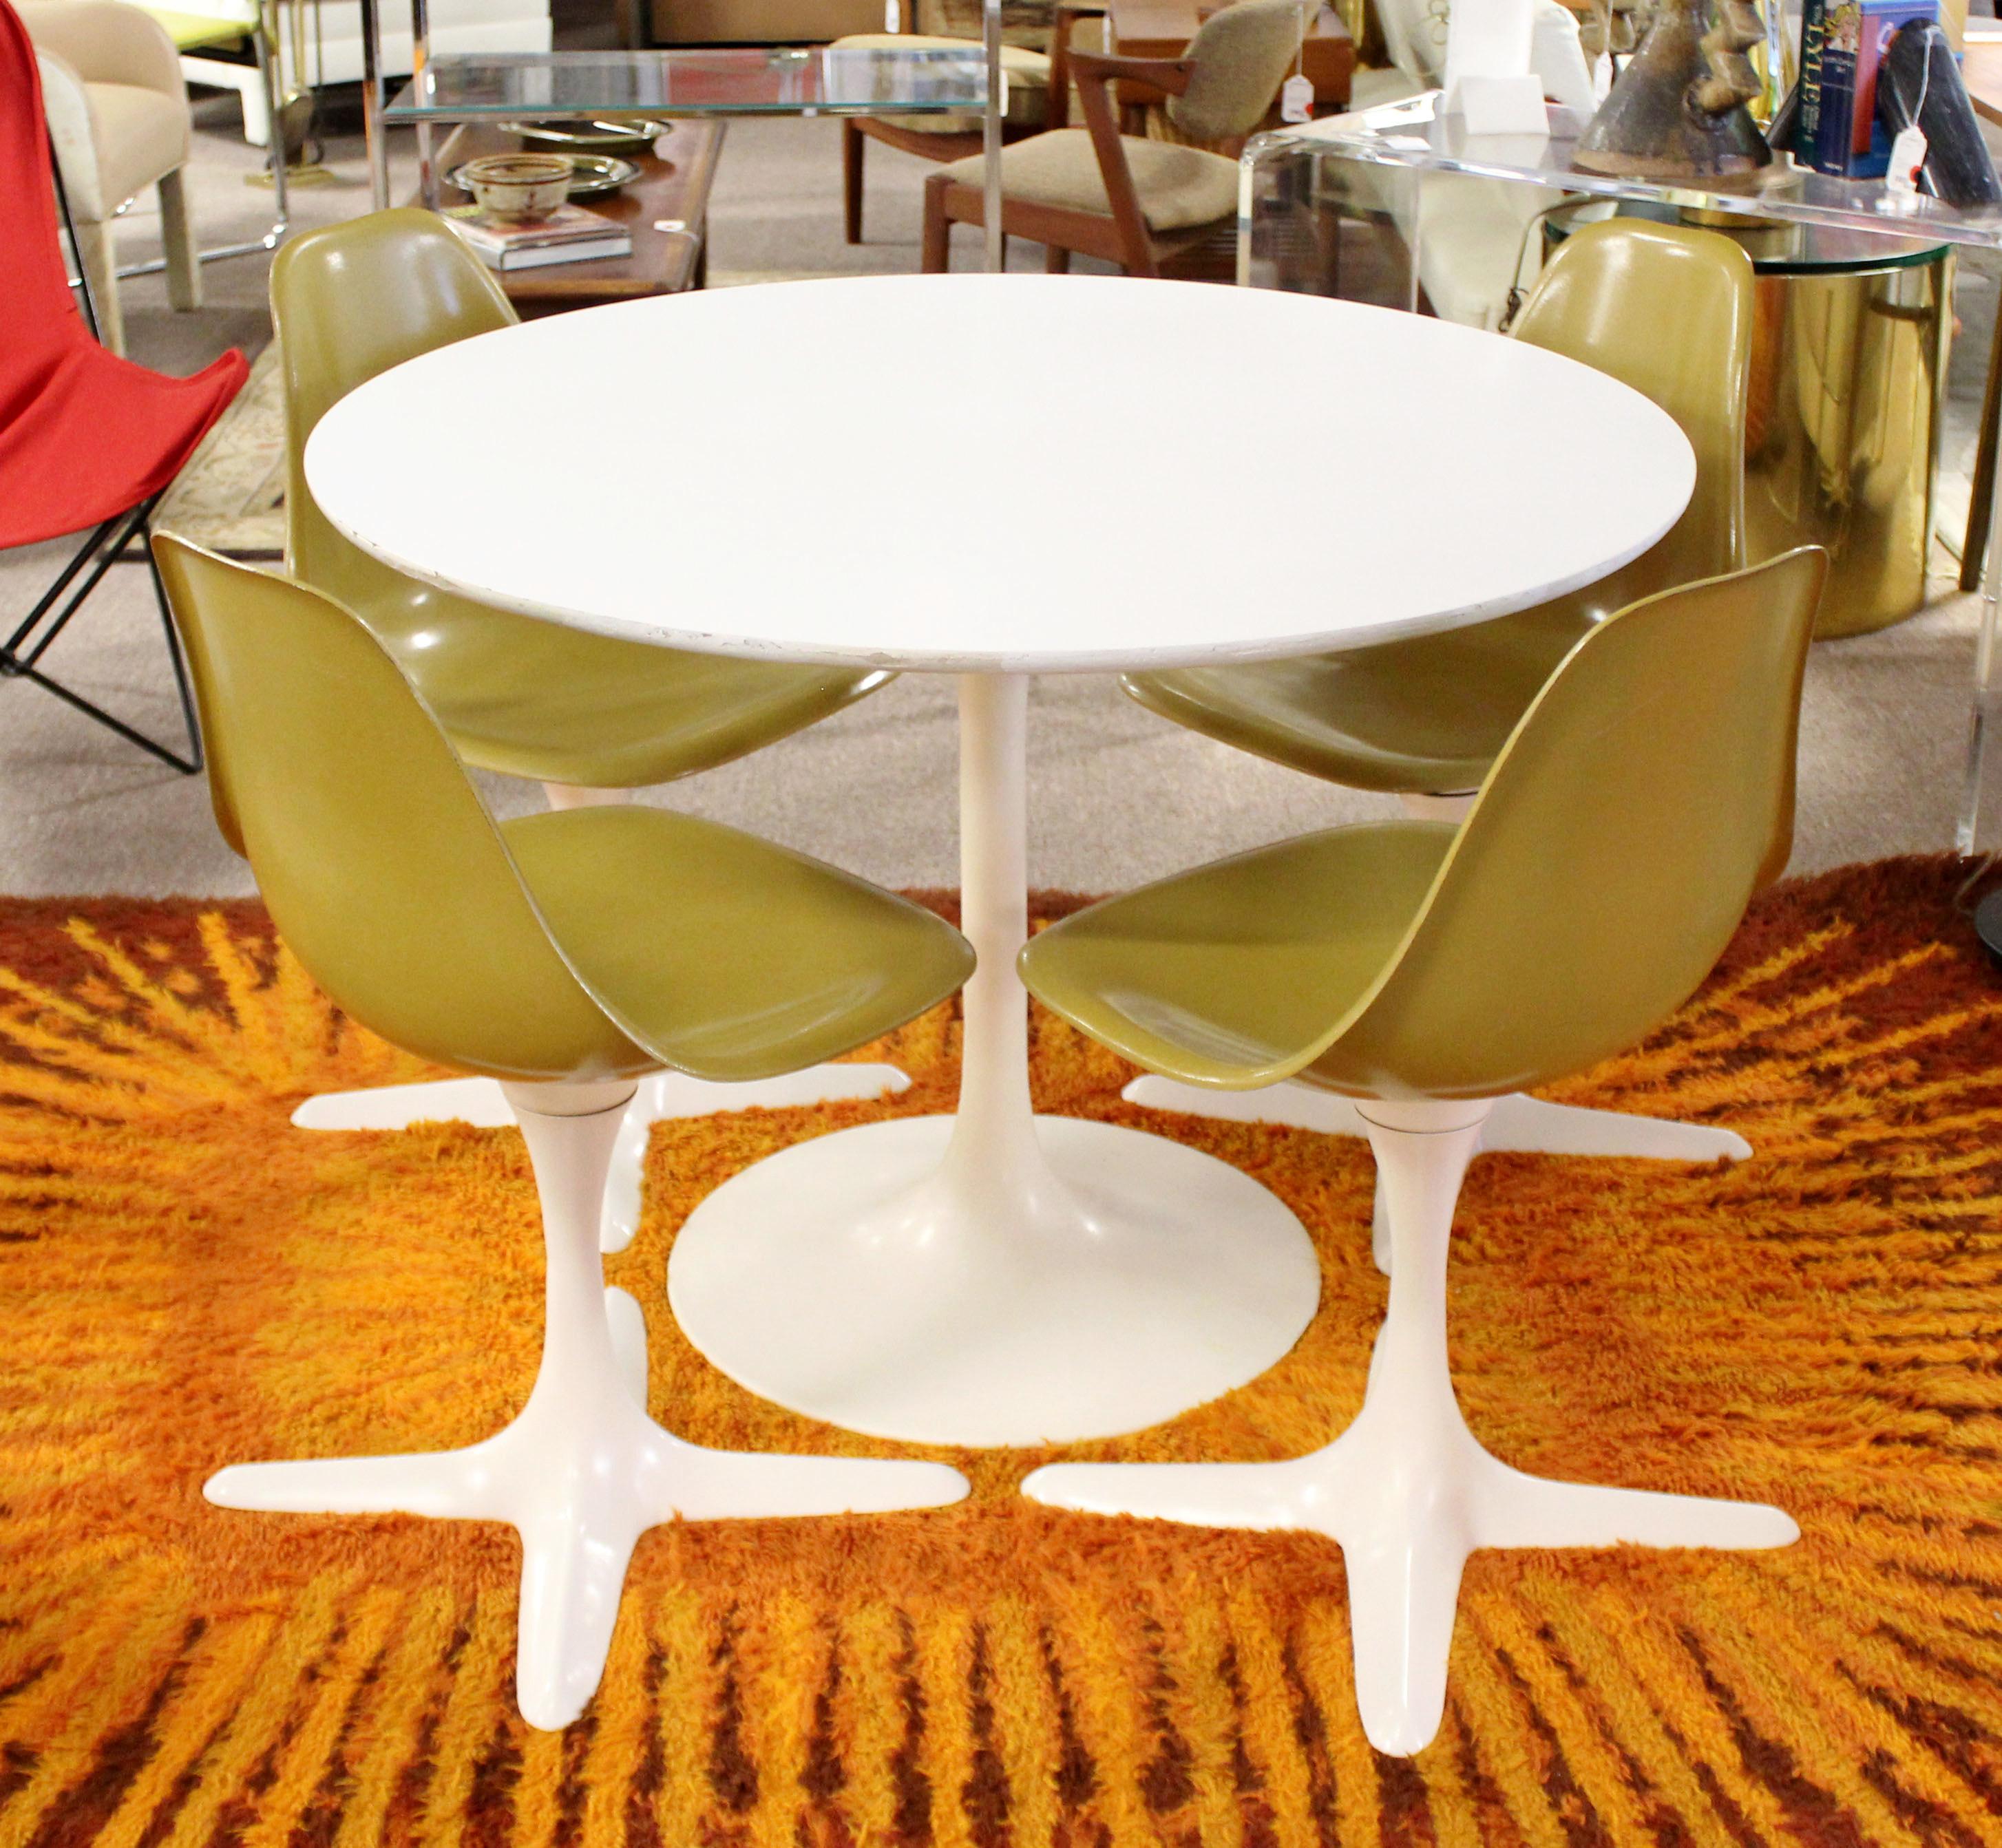 For your consideration is a stupendous, Tulip dining dinette set, including table and four propeller dining chairs that have brown shell seats, by Burke, circa 1960s. Chairs are in very good vintage condition and the table is in fair condition. The